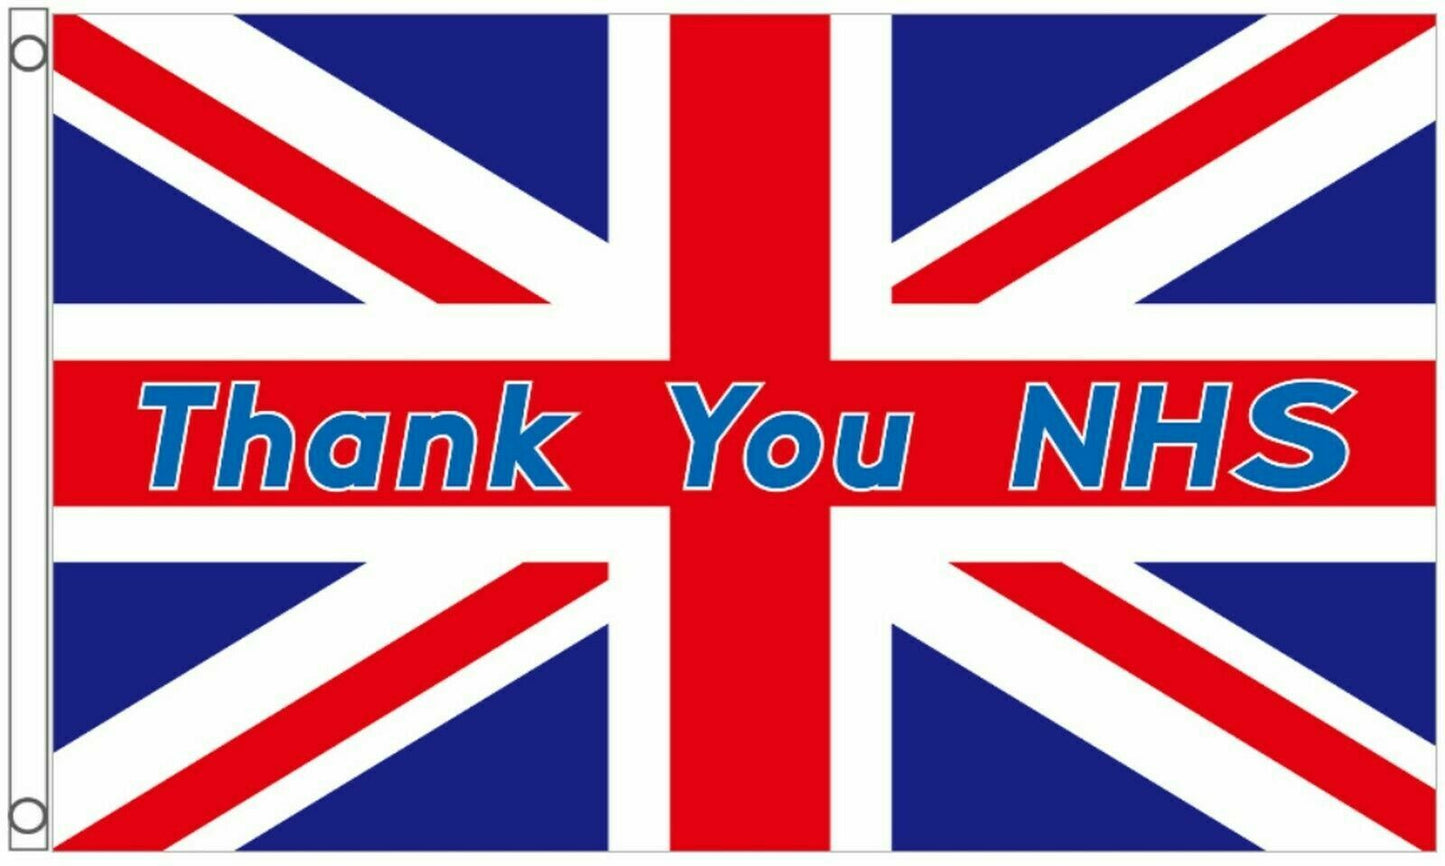 Thank you NHS flag 5ft x 3ft with eyelets